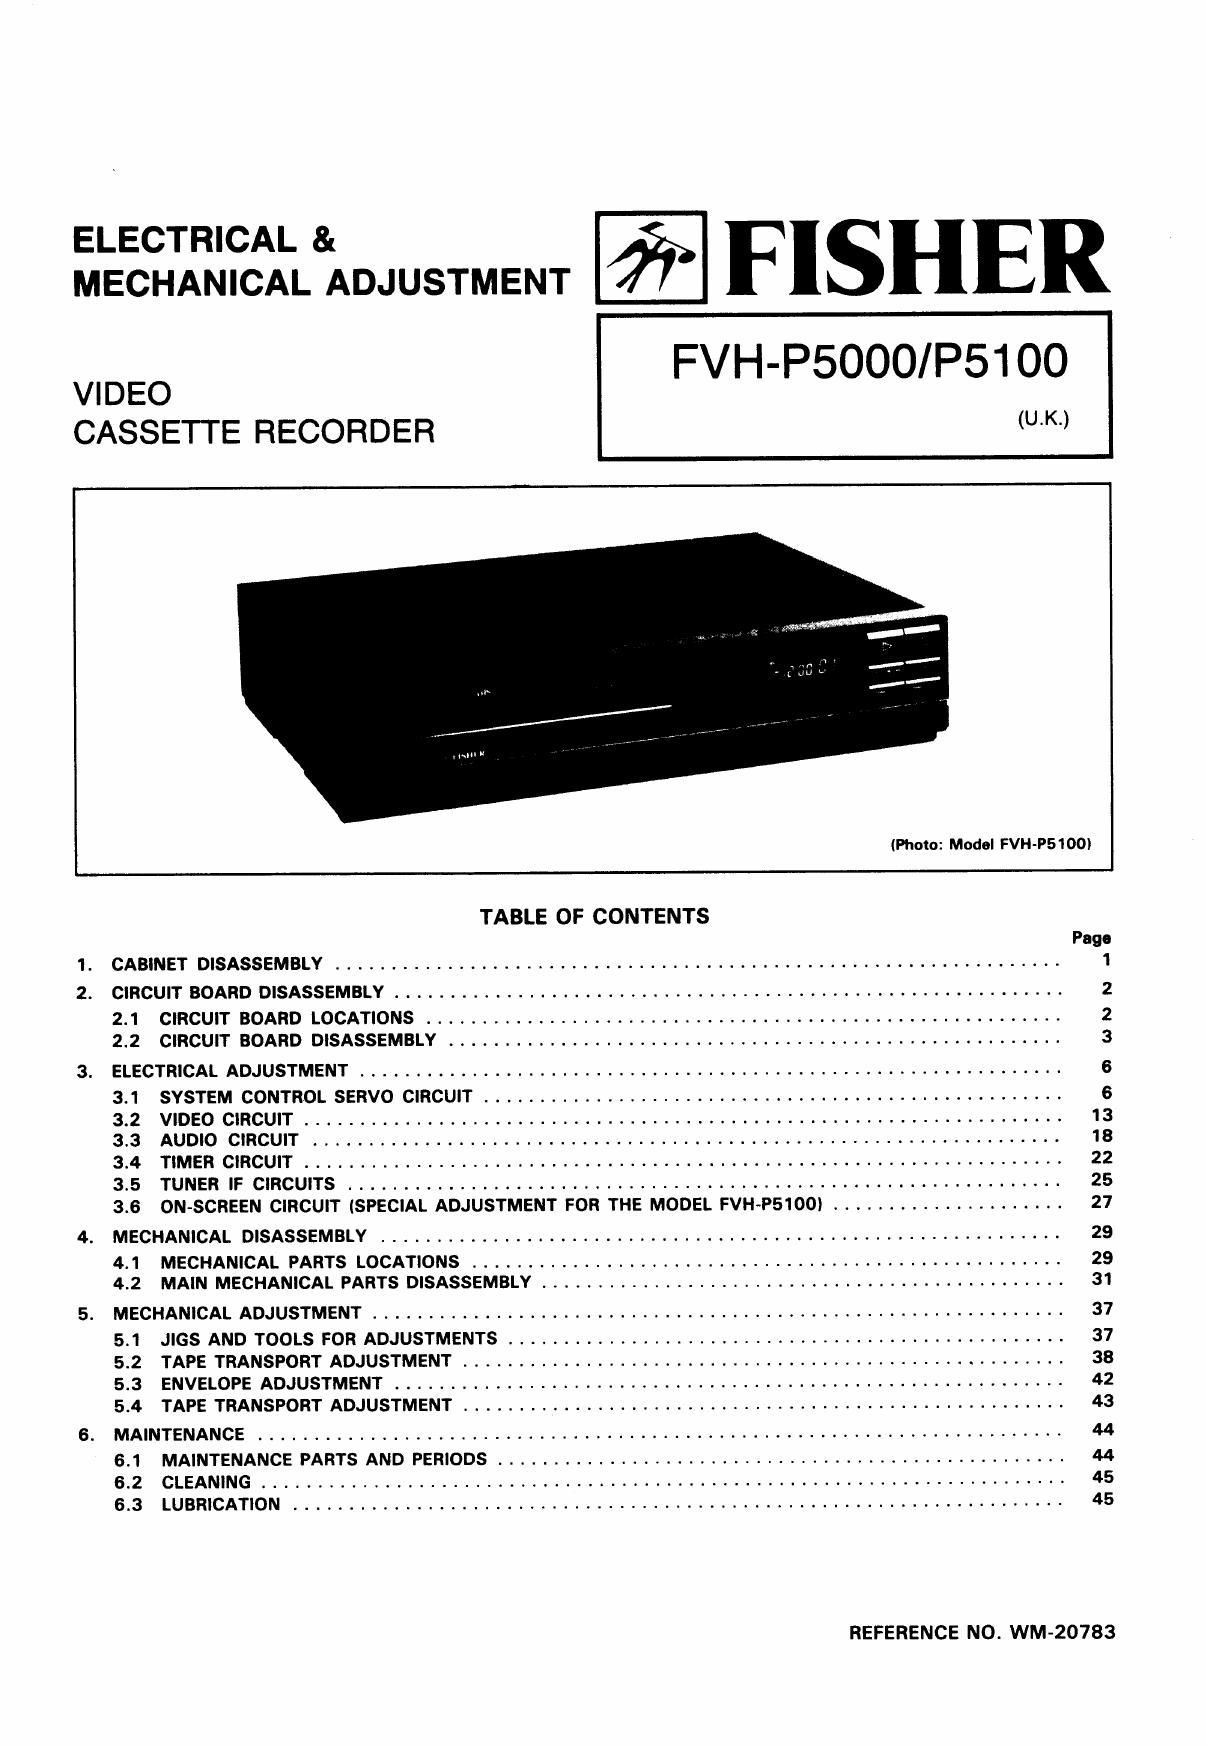 Fisher FVHP 5100 Service Manual